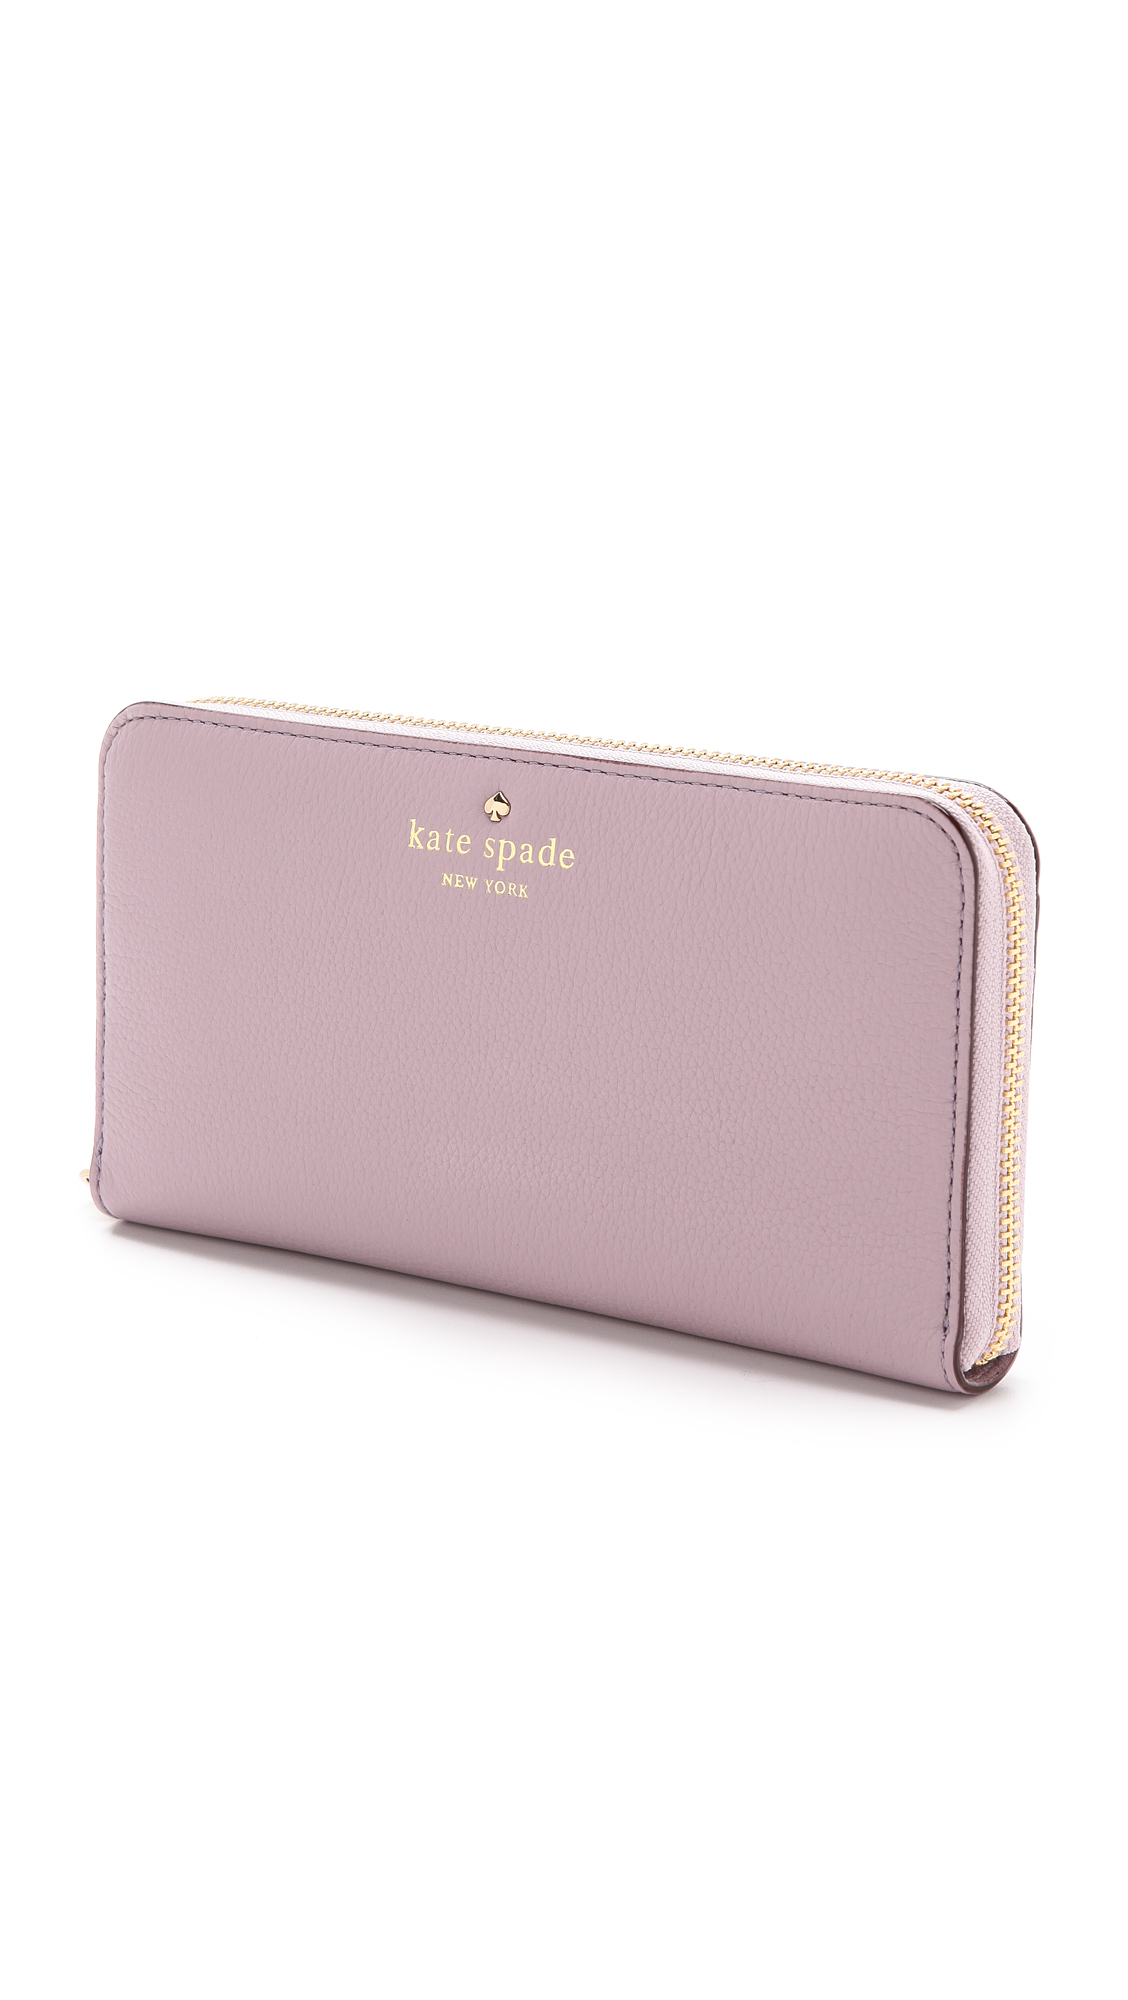 Kate spade new york Cobble Hill Lacey Wallet - Lilac Bliss in Purple | Lyst